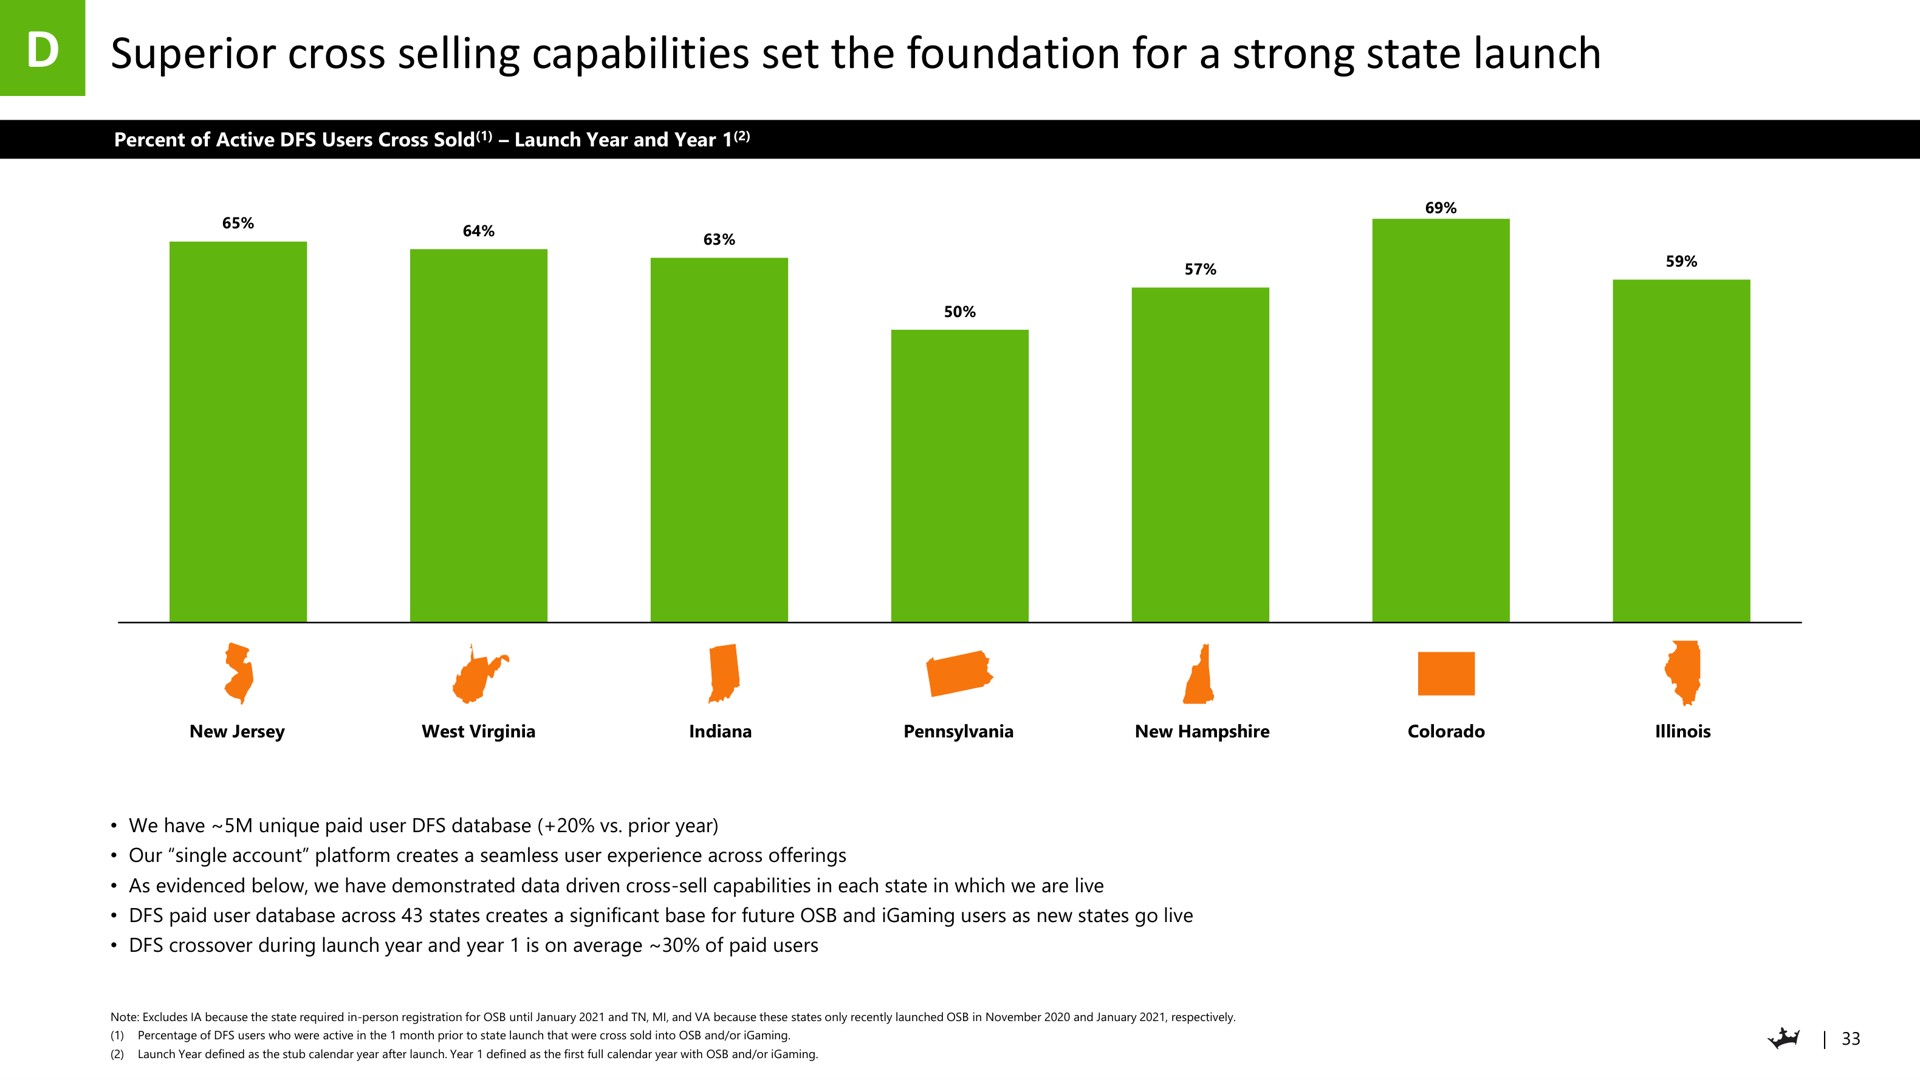 superior cross selling capabilities set the foundation for a strong state launch | DraftKings